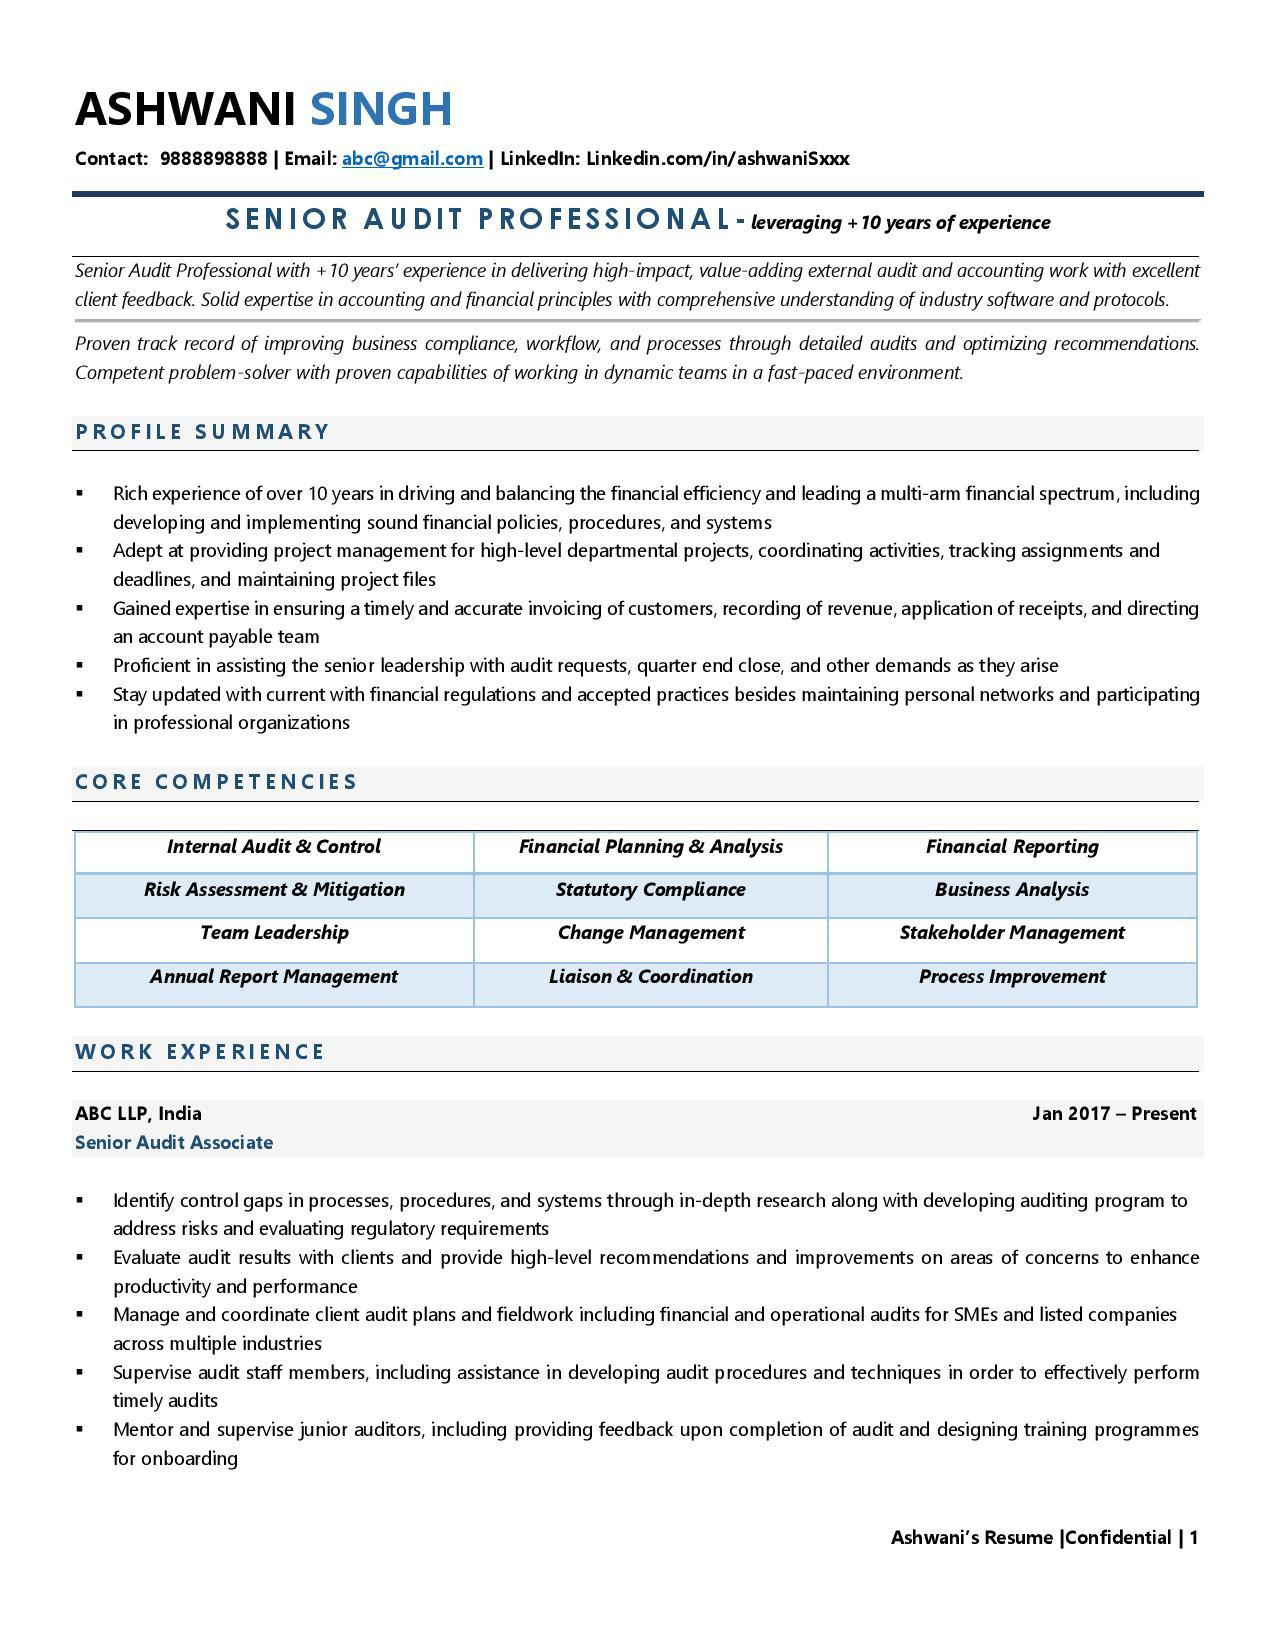 Sample Resume for Head Internal Audit Auditor Resume Examples & Template (with Job Winning Tips)